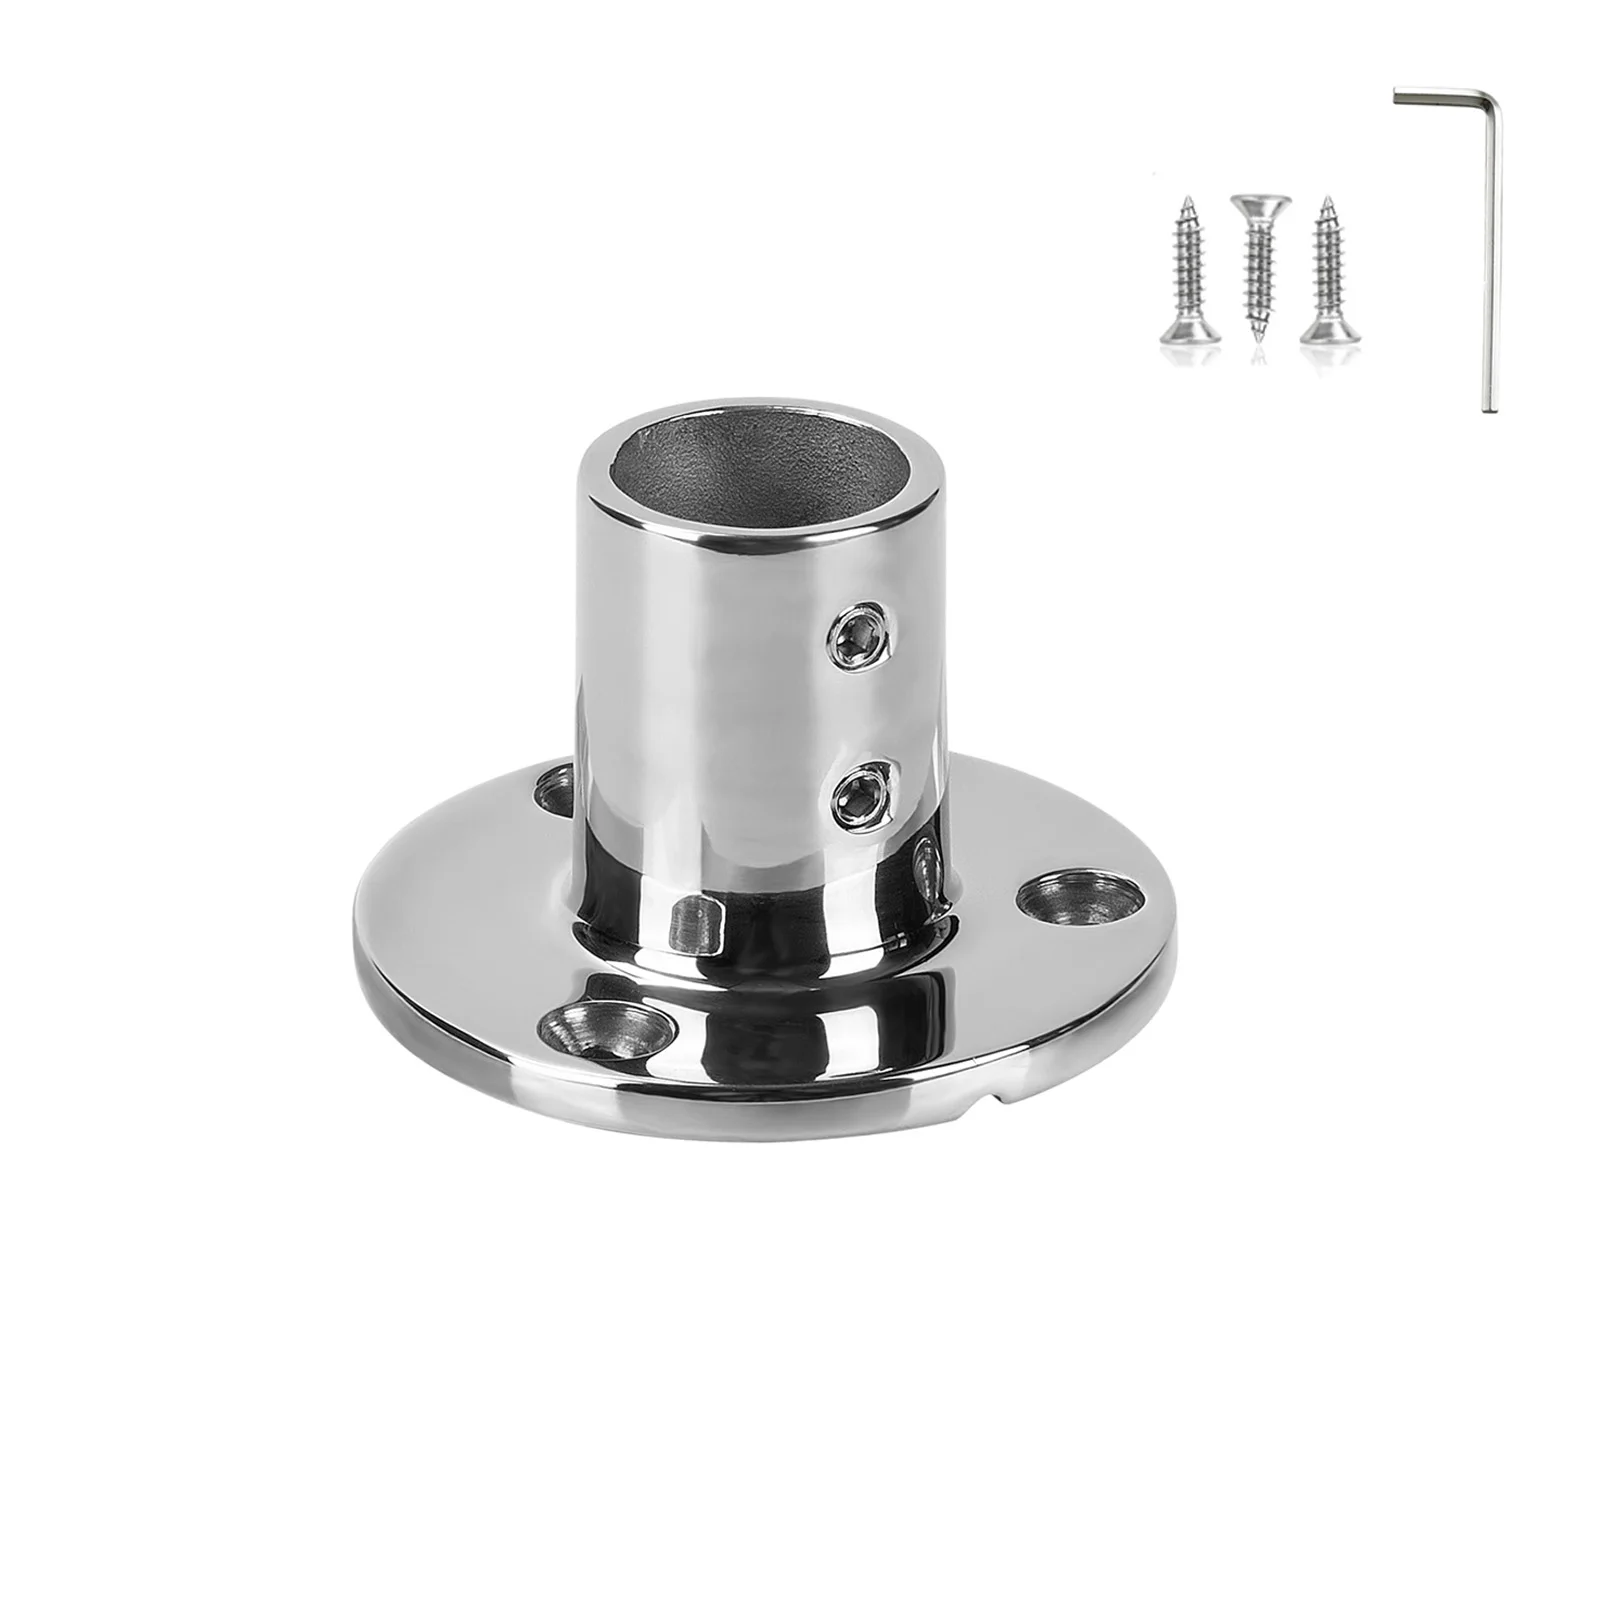 Marine Grade Boat Hand Rail Base, Durable, Versatile Application, 316 Ss Round 90 Degree Base Rail Fitting for 7/8 inch Tube 3 7 inch com37h3m04dlc 480×640 resolution 39 pins ttl interface sunlight readable application industrial lcd display replacement